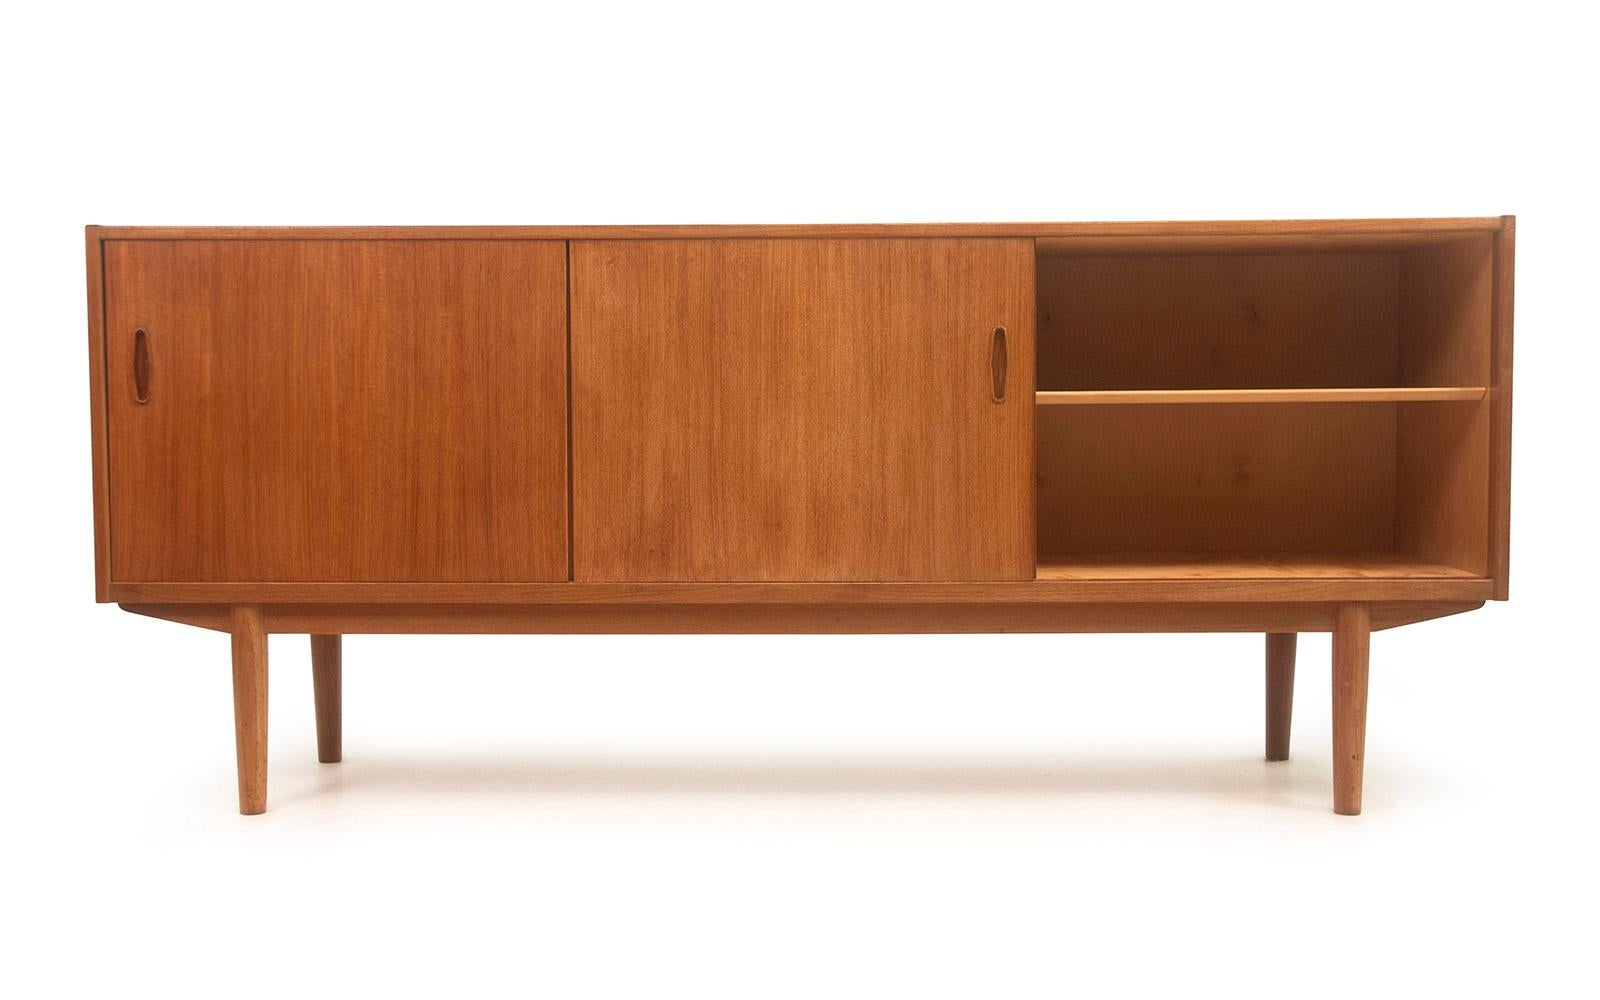 Troeds teak sideboard 

Designed for Hugo Troeds by Nils Jonsson during the 1960s, this stylish sideboard was made in Sweden to a Danish design. Featuring two sliding doors to both the left and right sides, along with four central dovetailed